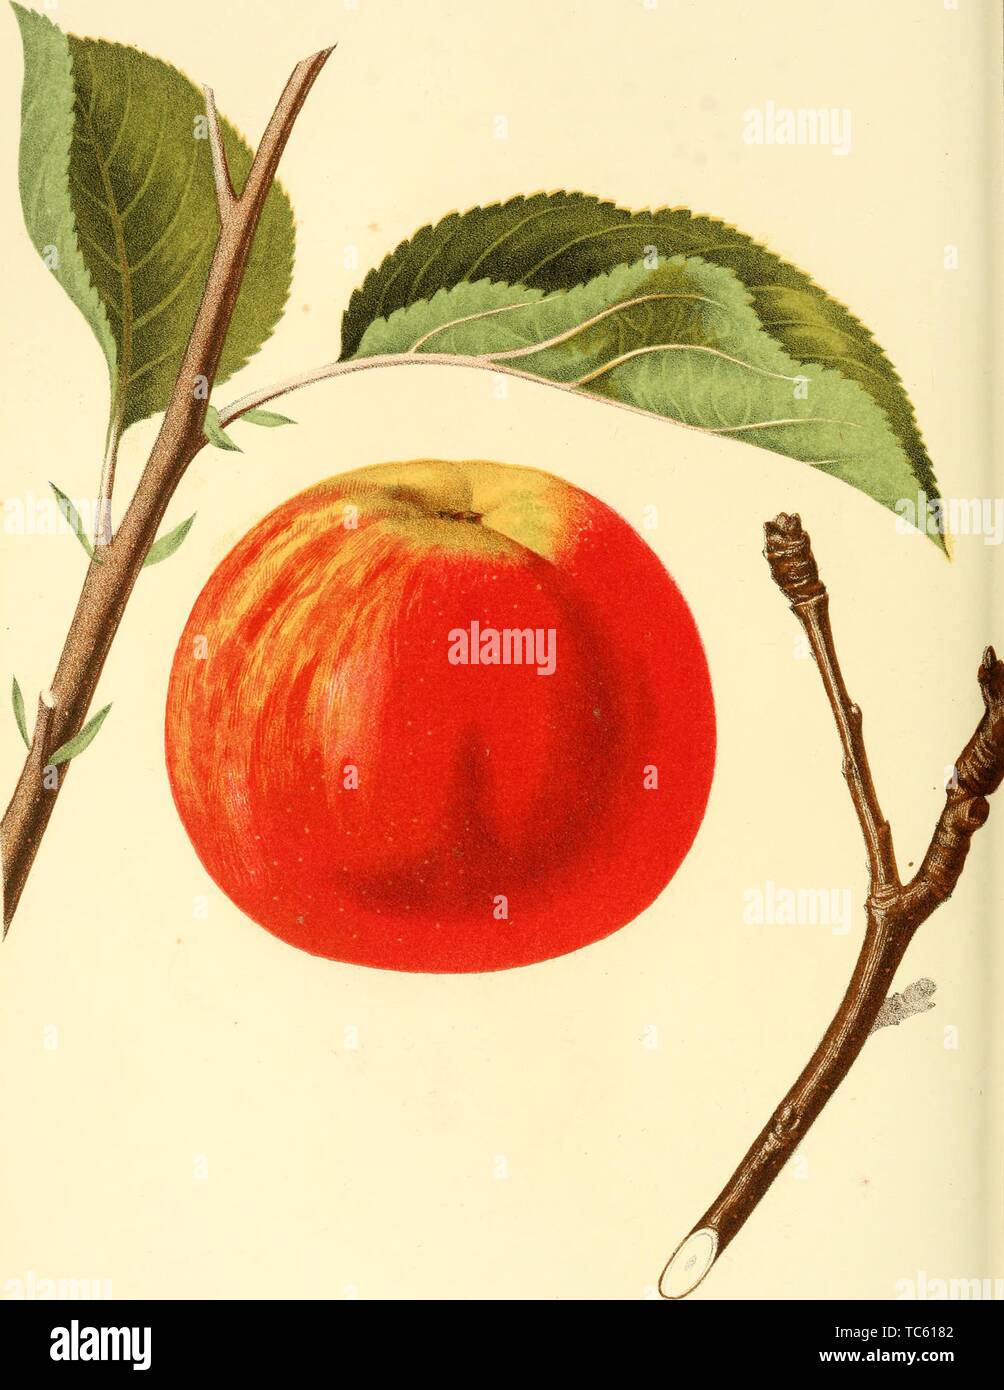 Engraving of the Cogswell Apple, from the book 'The fruits of America' by Charles Mason Hovey, 1848. Courtesy Internet Archive. () Stock Photo